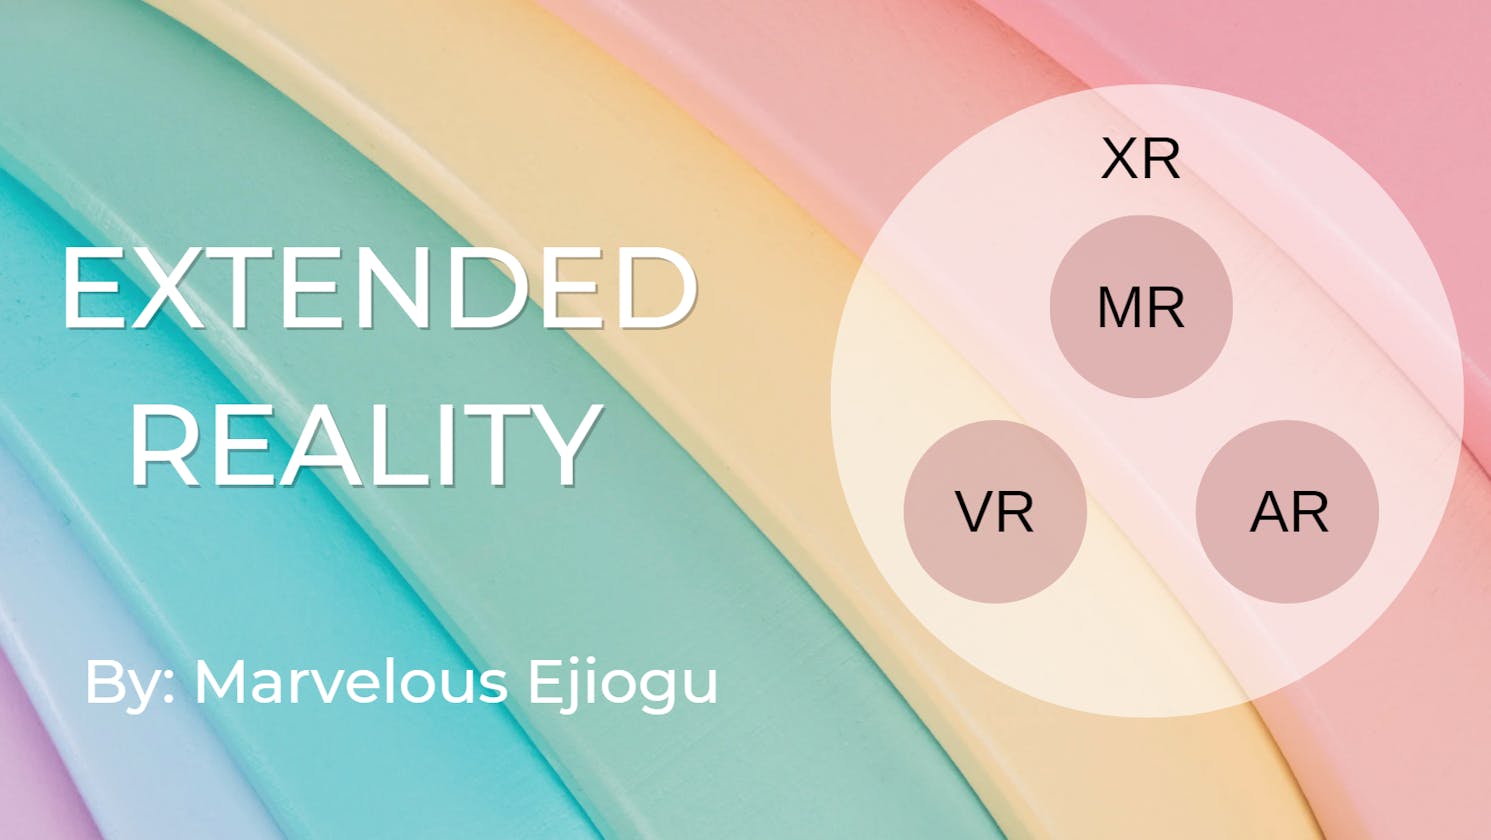 Exploring Extended Reality: An Exciting Guide for Better Understanding